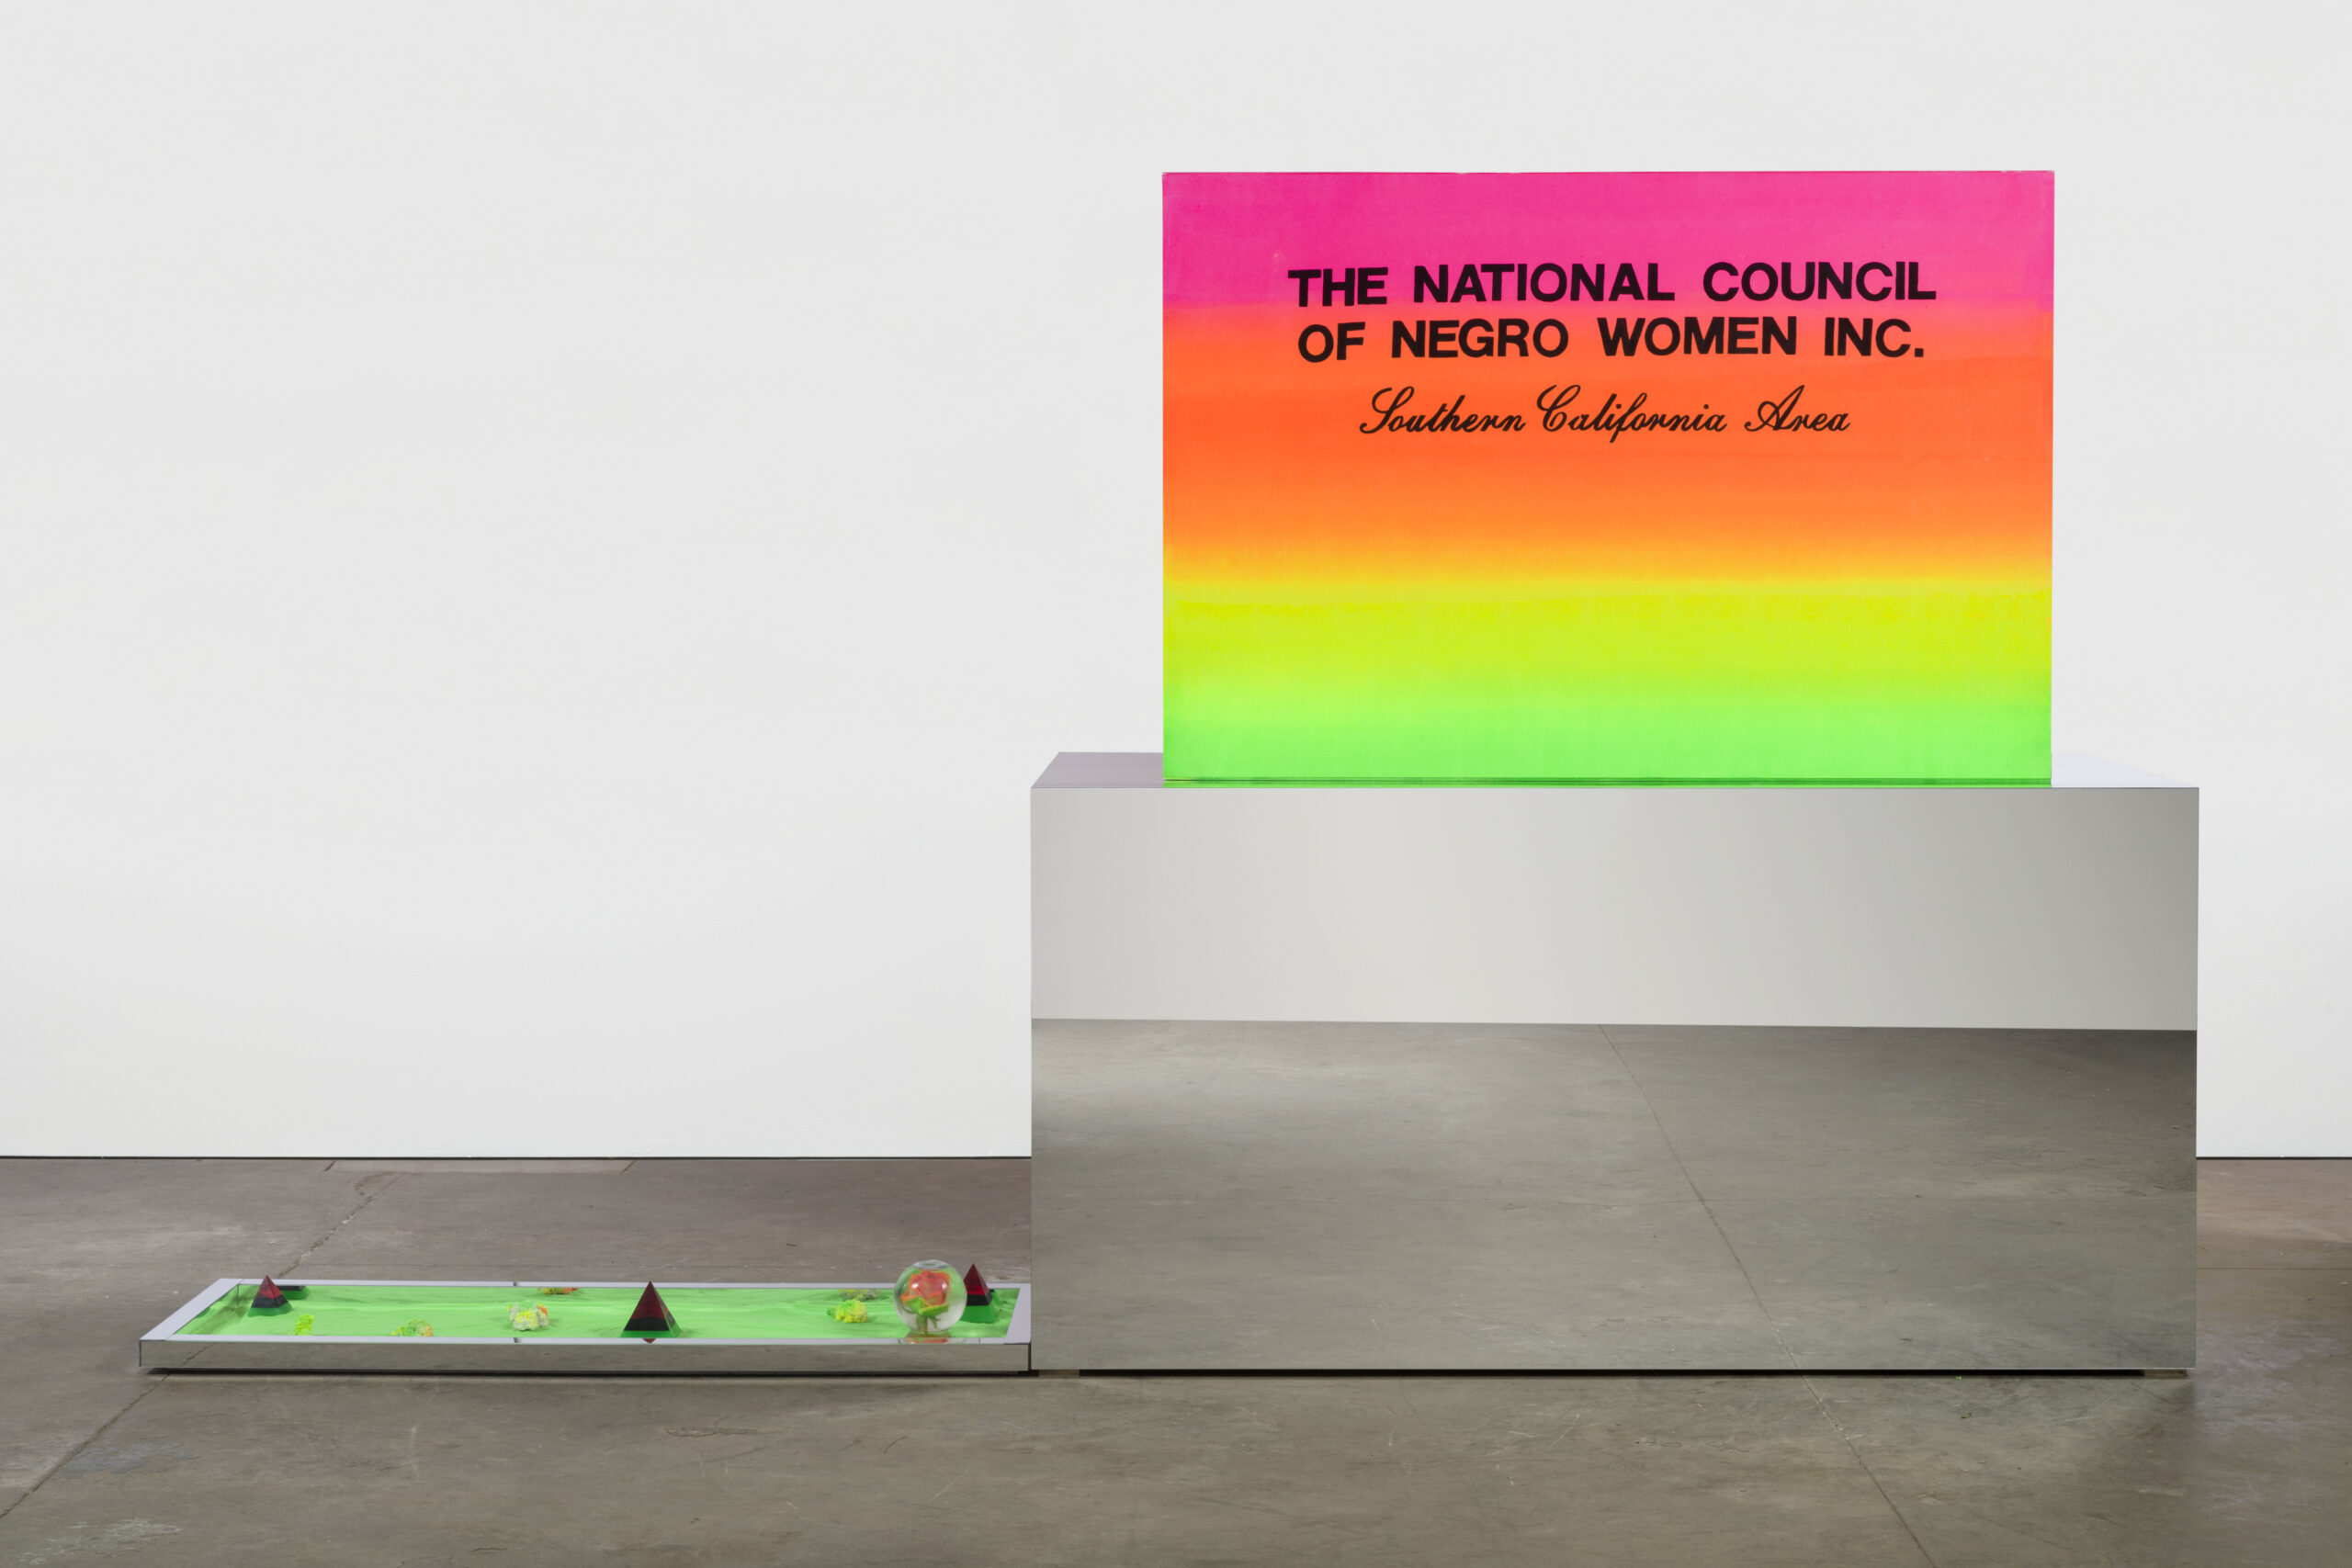 Lauren Halsey, The National Council of Negro Women Inc., 2020, Acrylic, mirror, sand, and objects on foam and wood, 94 x 158 x 45 Inches, Object: Courtesy the artist and David Kordansky Gallery, Los Angeles, CA